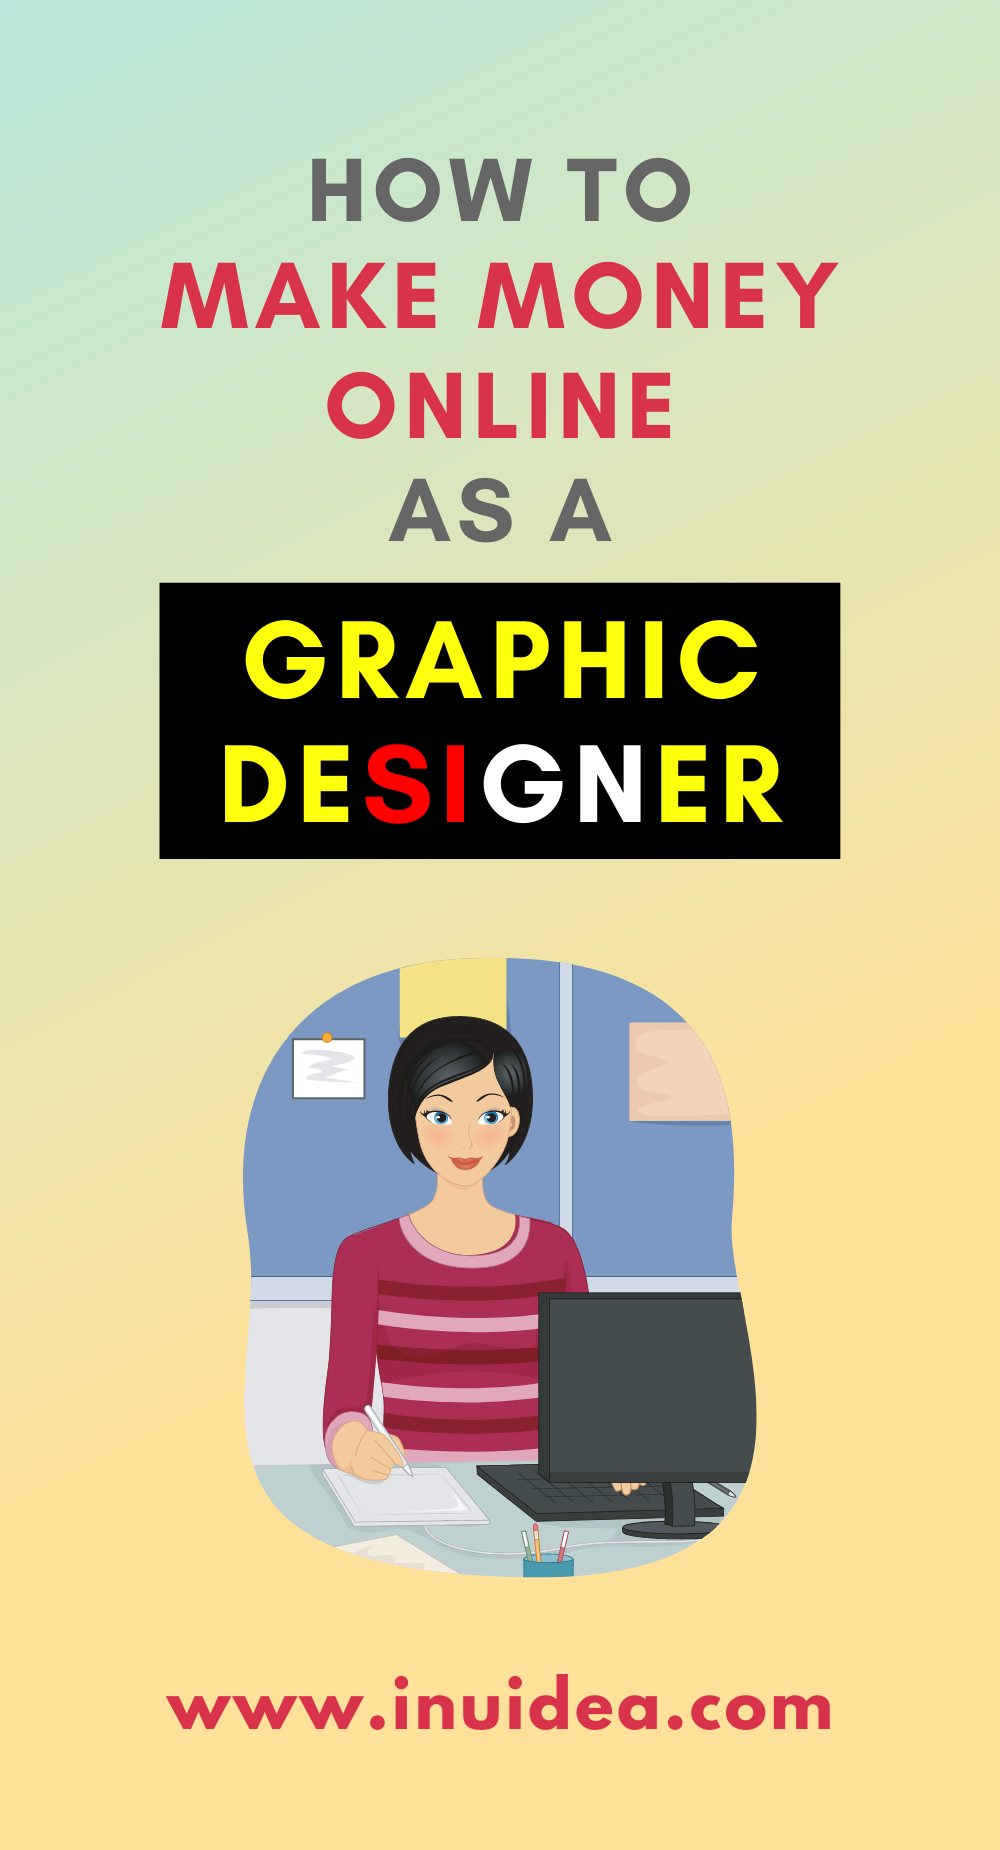 How to Make Money Online As a Graphic Designer